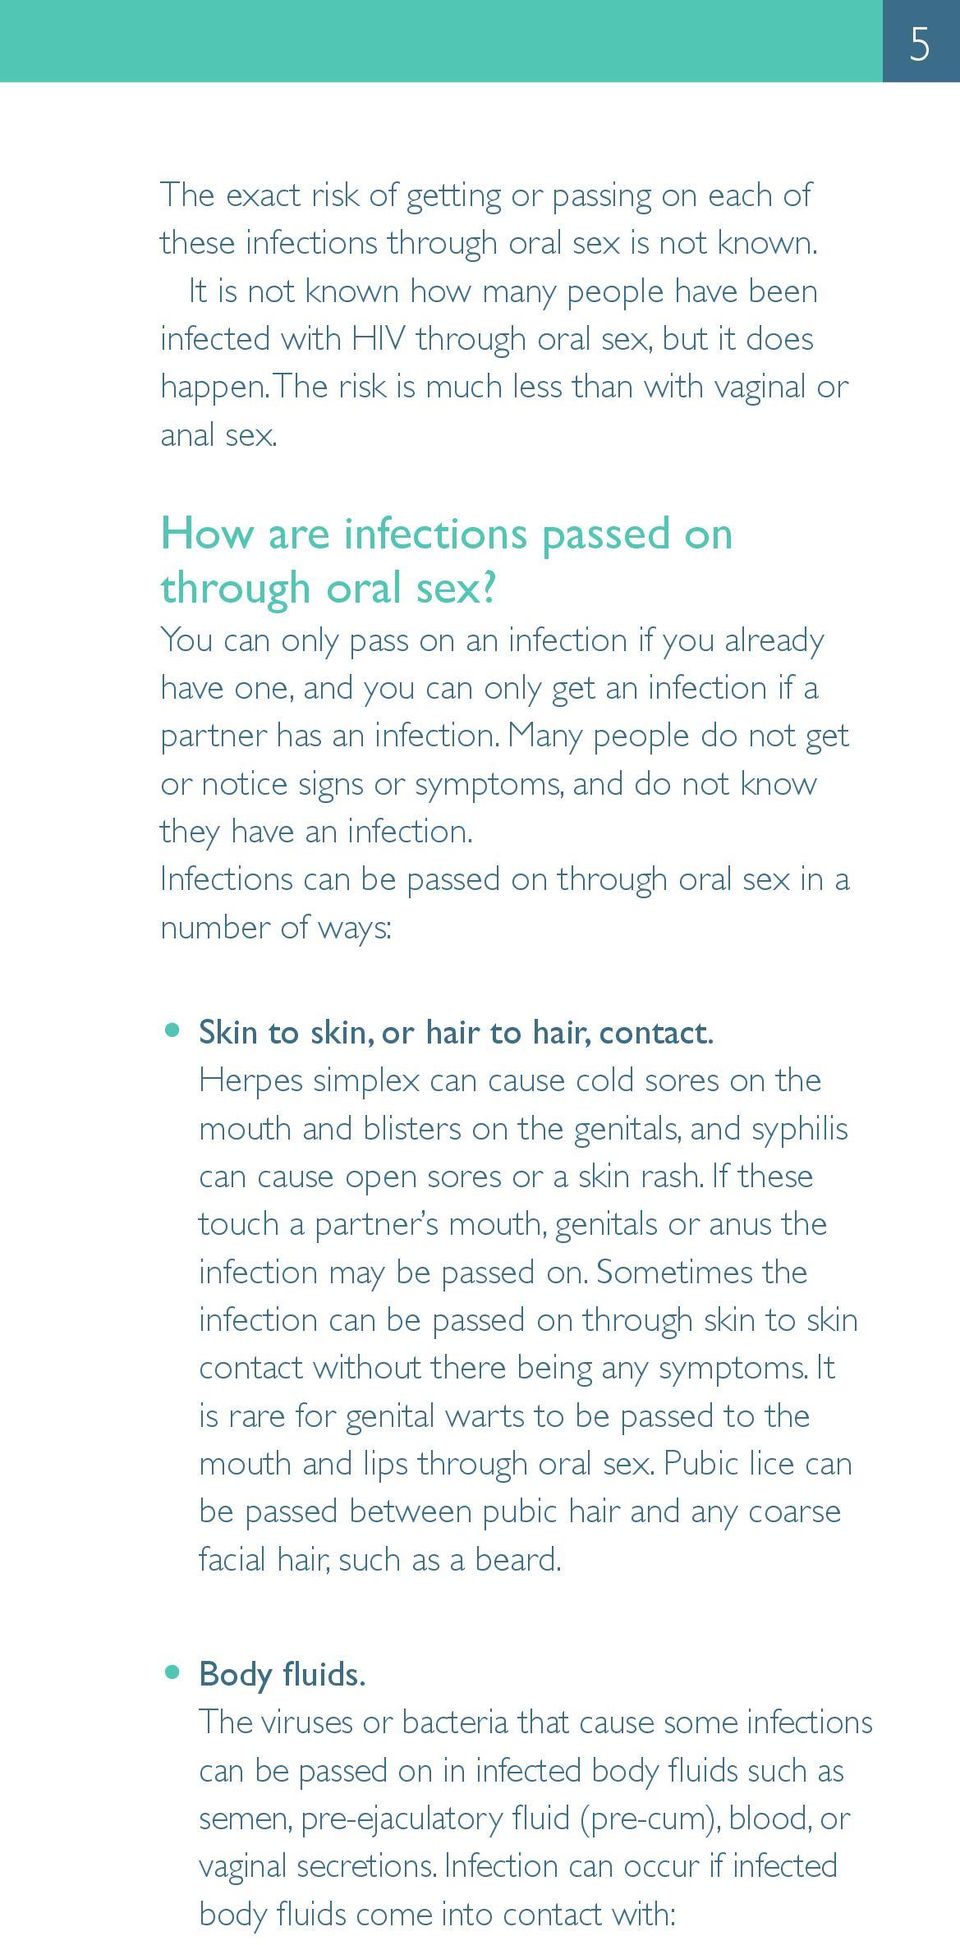 You can only pass on an infection if you already have one, and you can only get an infection if a partner has an infection.